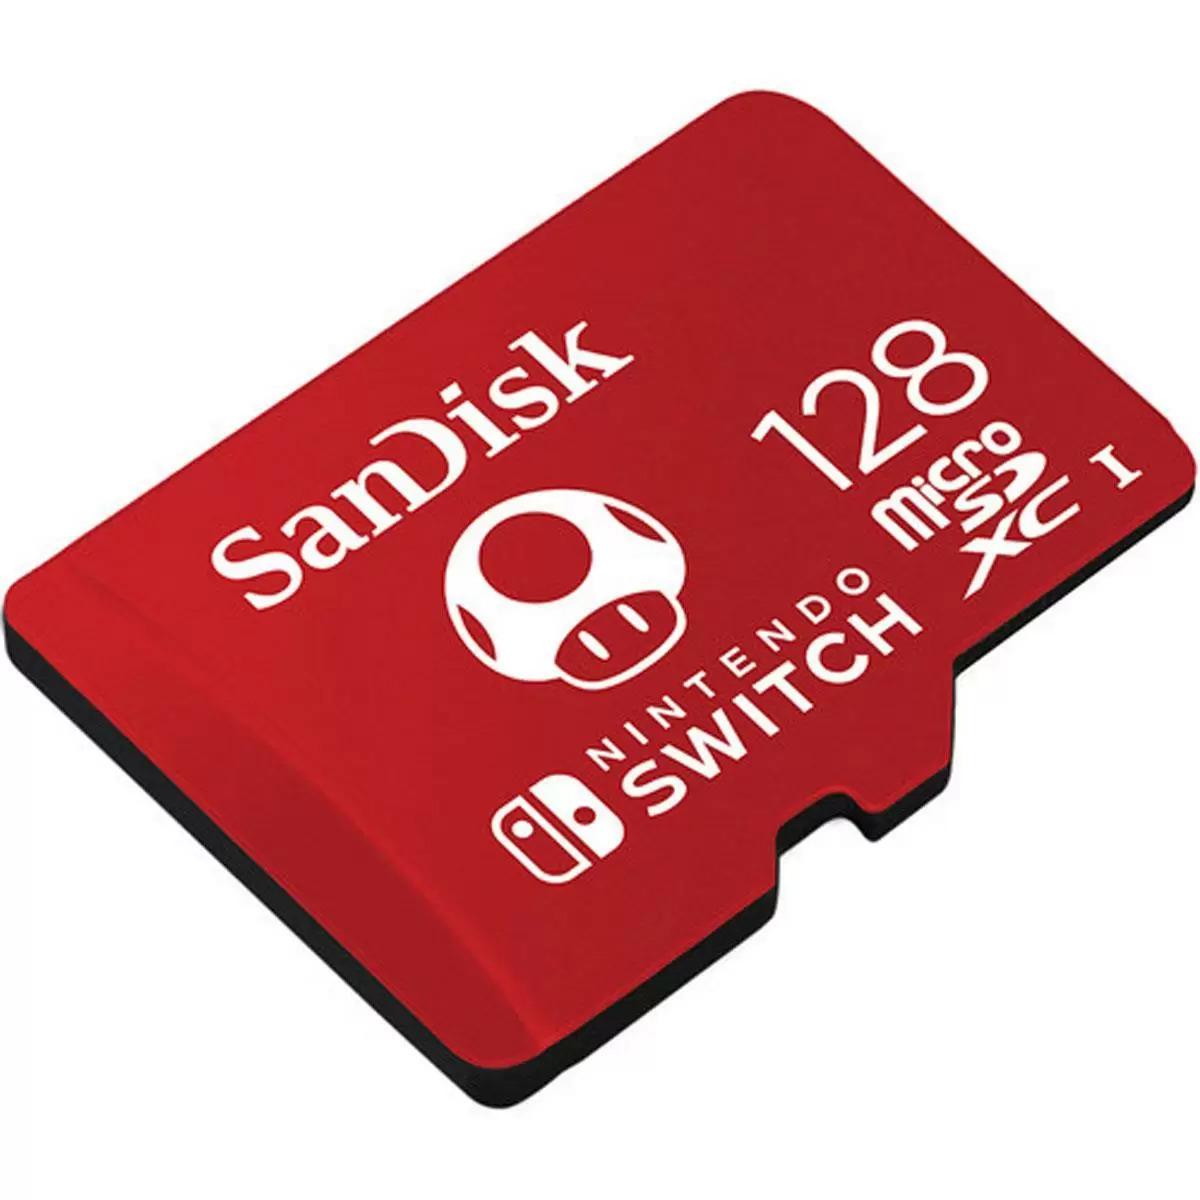 SanDisk 128GB UHS-I microSDXC Memory Card for the Nintendo Switch for $8.99